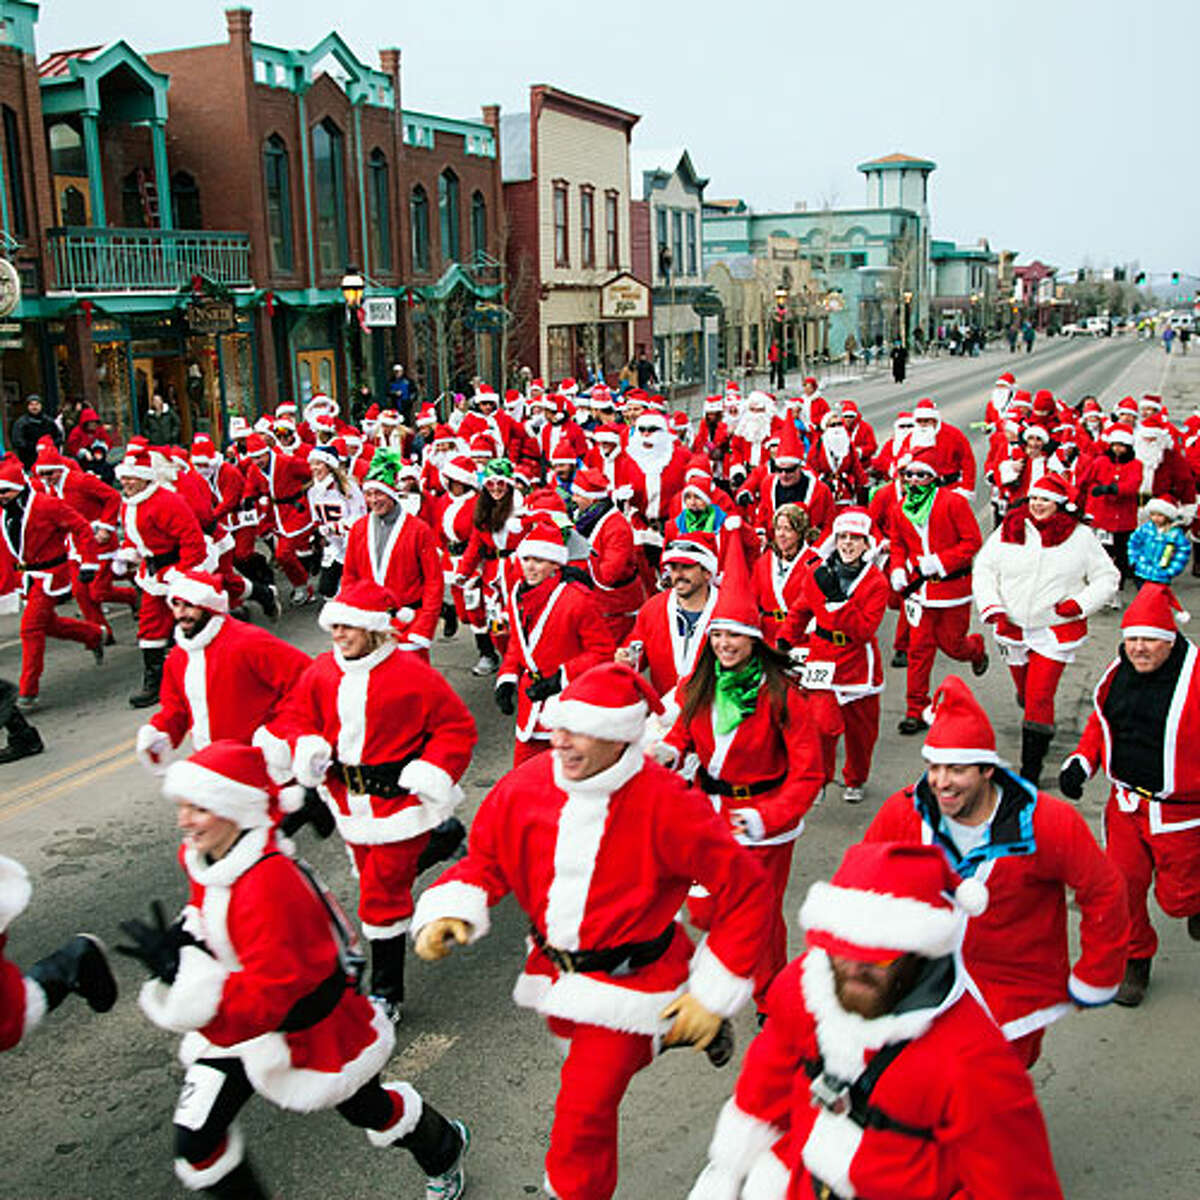 14 great holiday events in the West